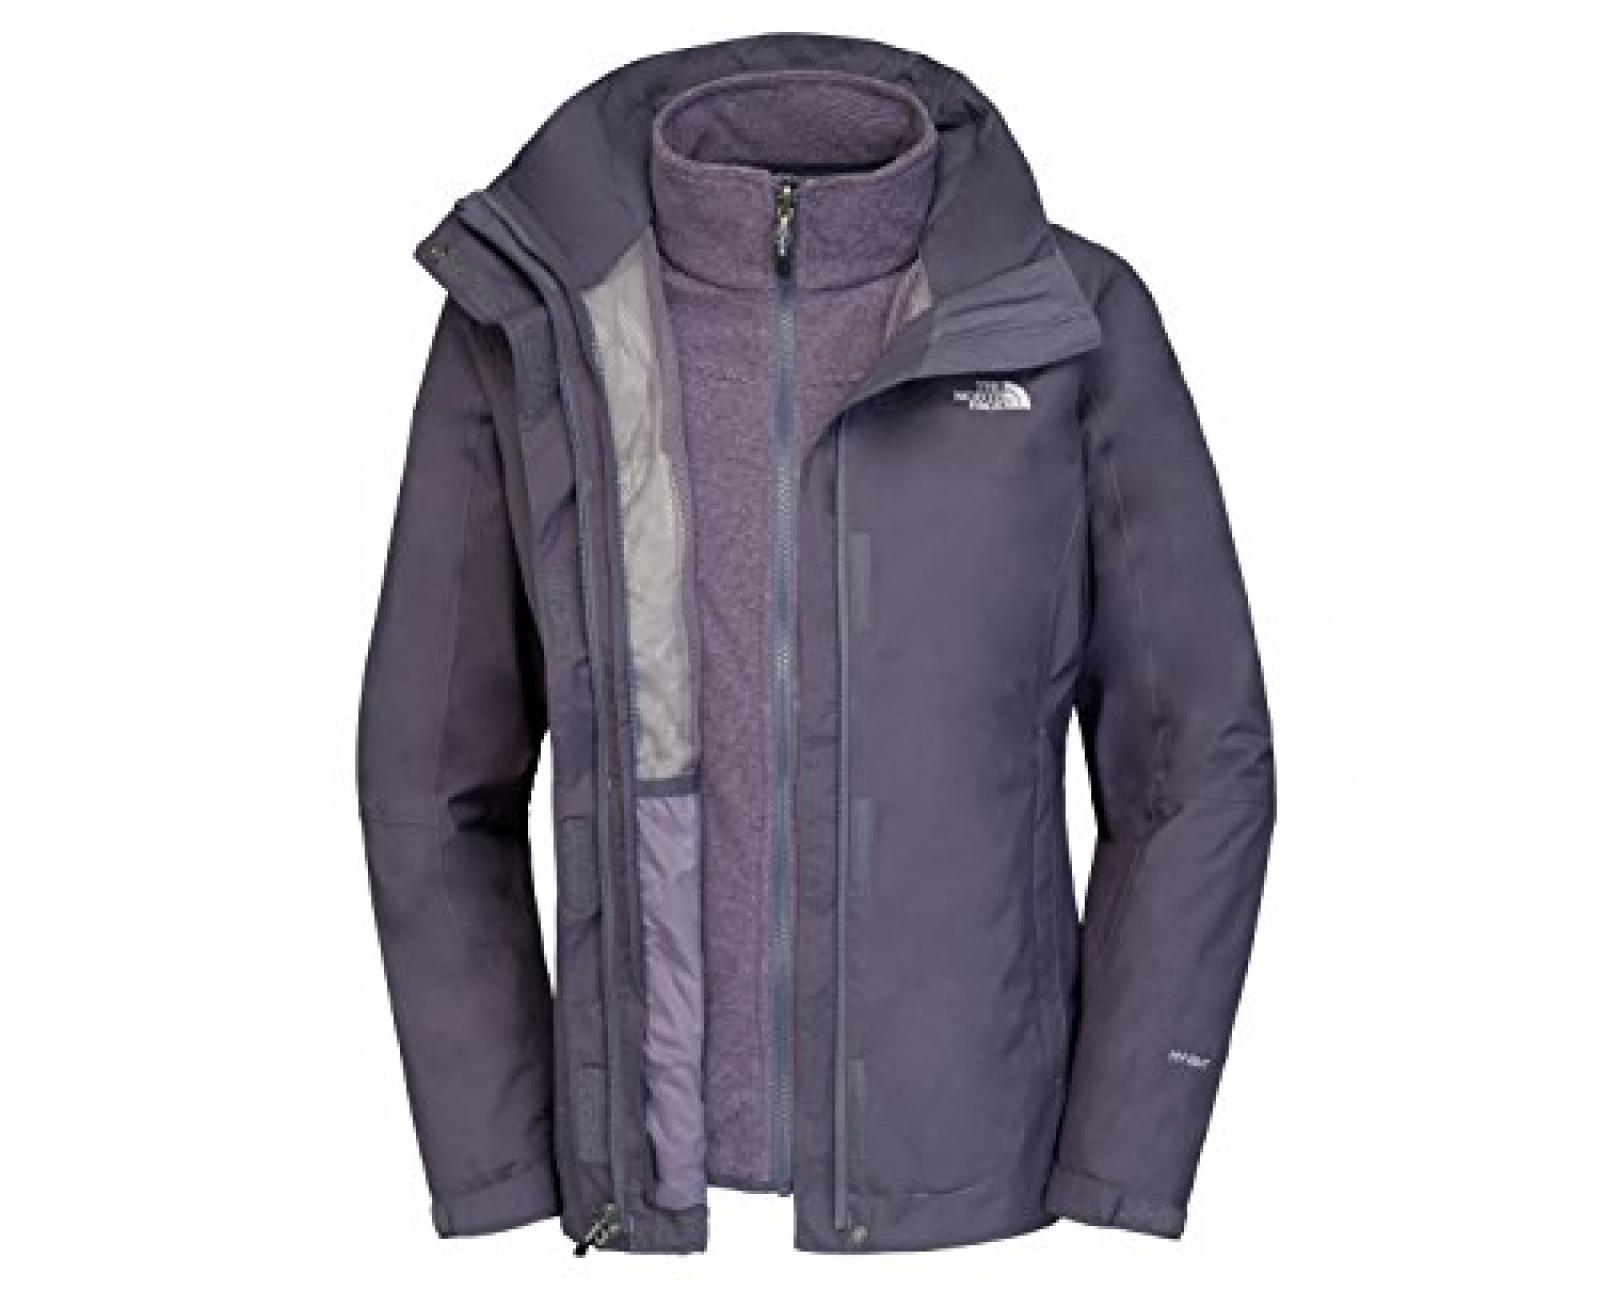 THE NORTH FACE Zephyr Triclimate Damen Jacke 